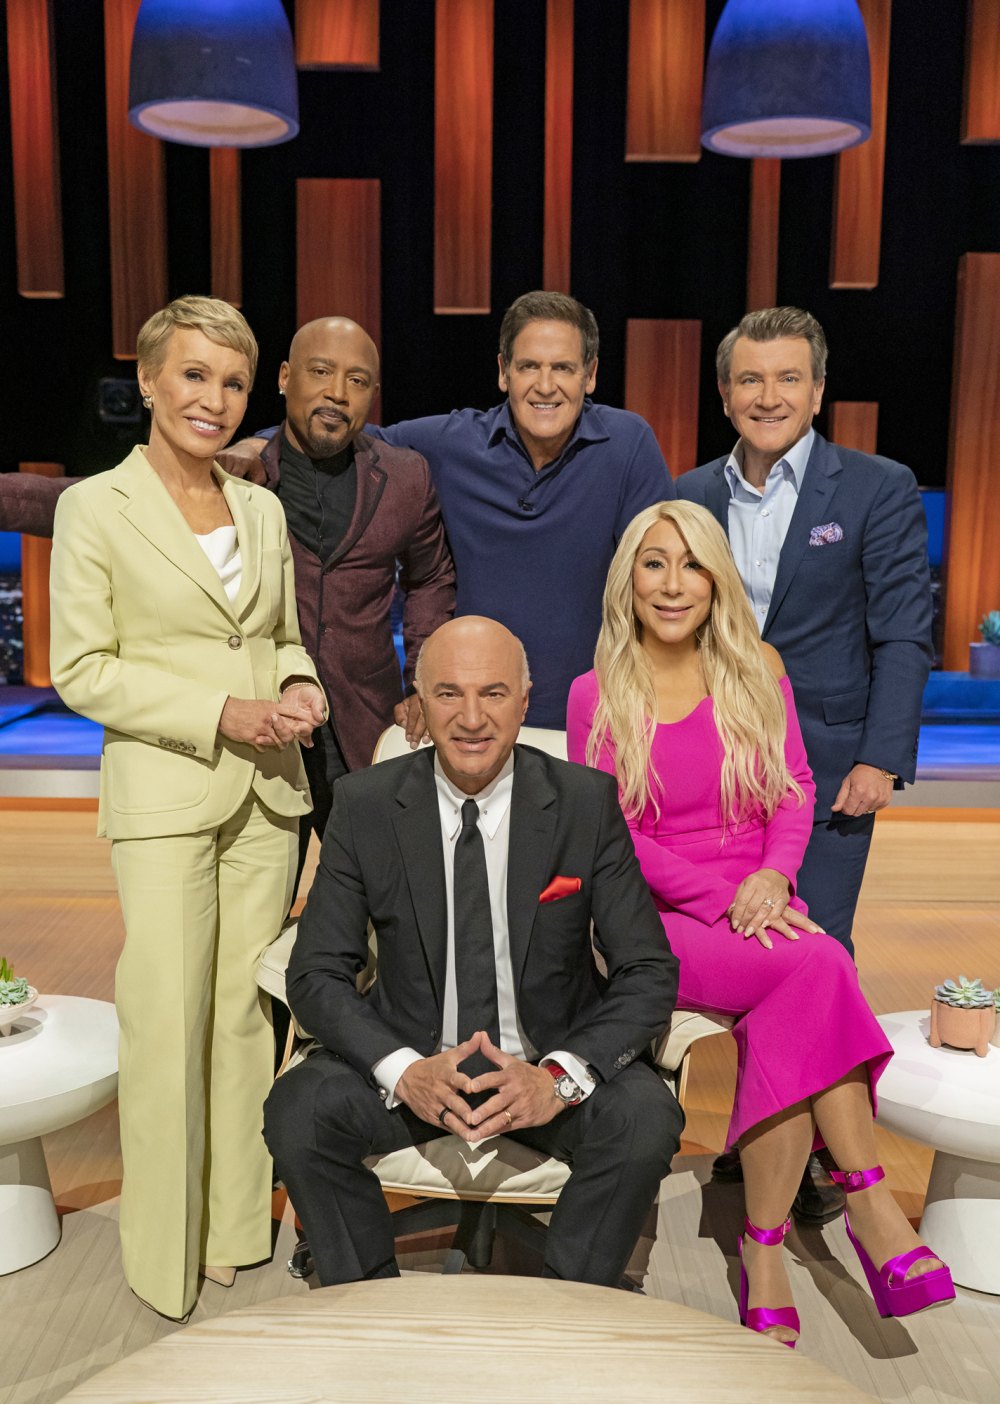 Kevin O Leary Says He Was Cast on Shark Tank For Being an A-Hole